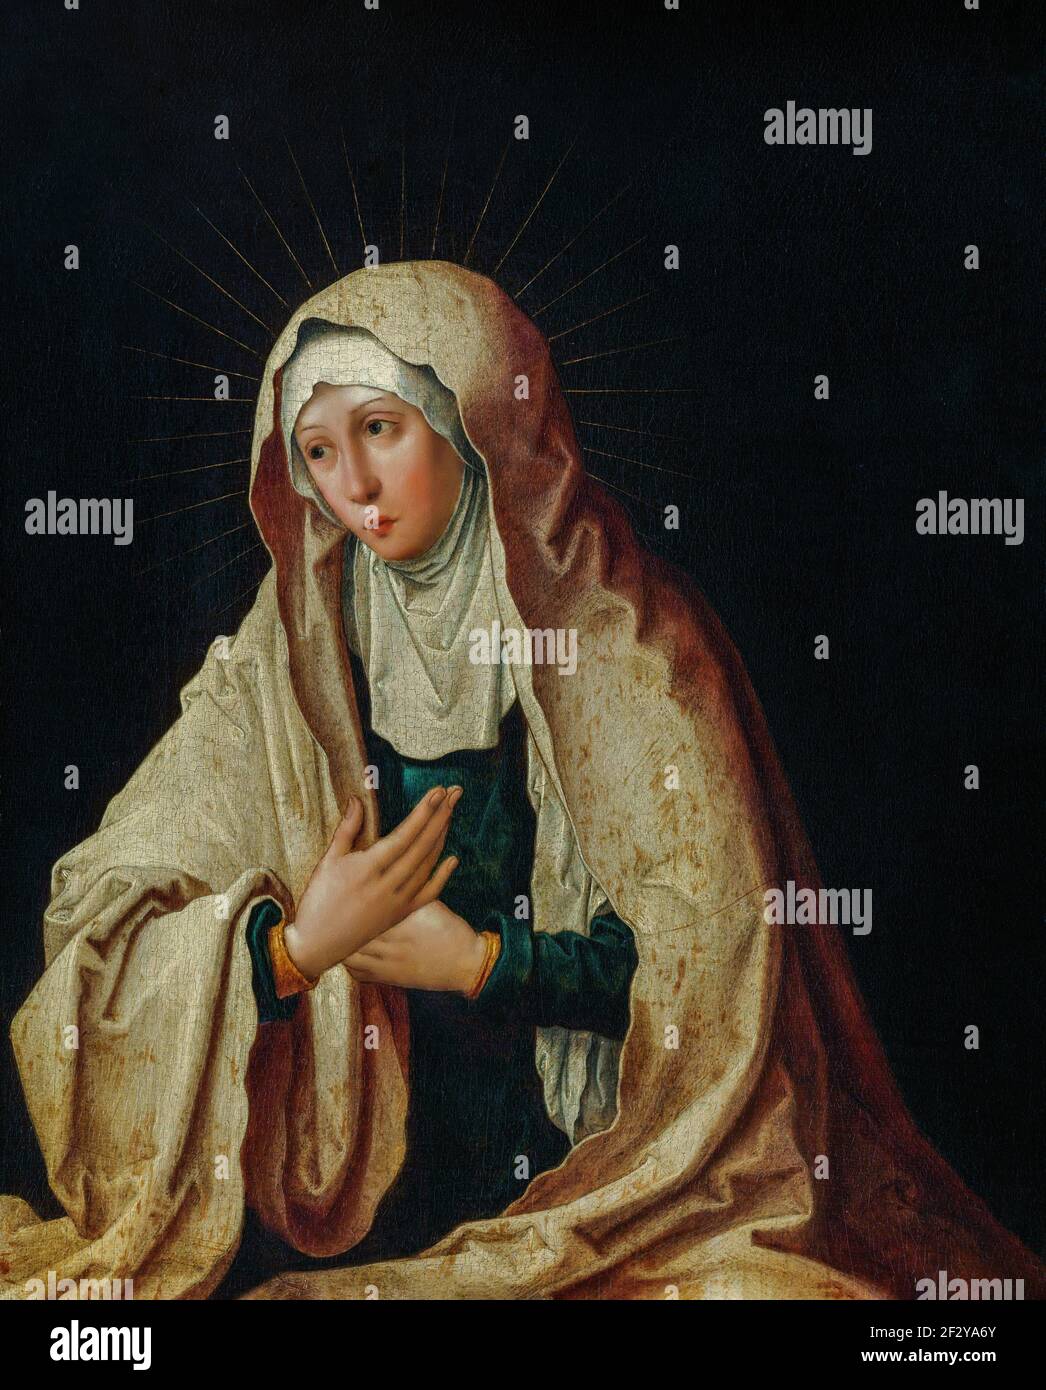 portrait of the holy virgin mary Stock Photo